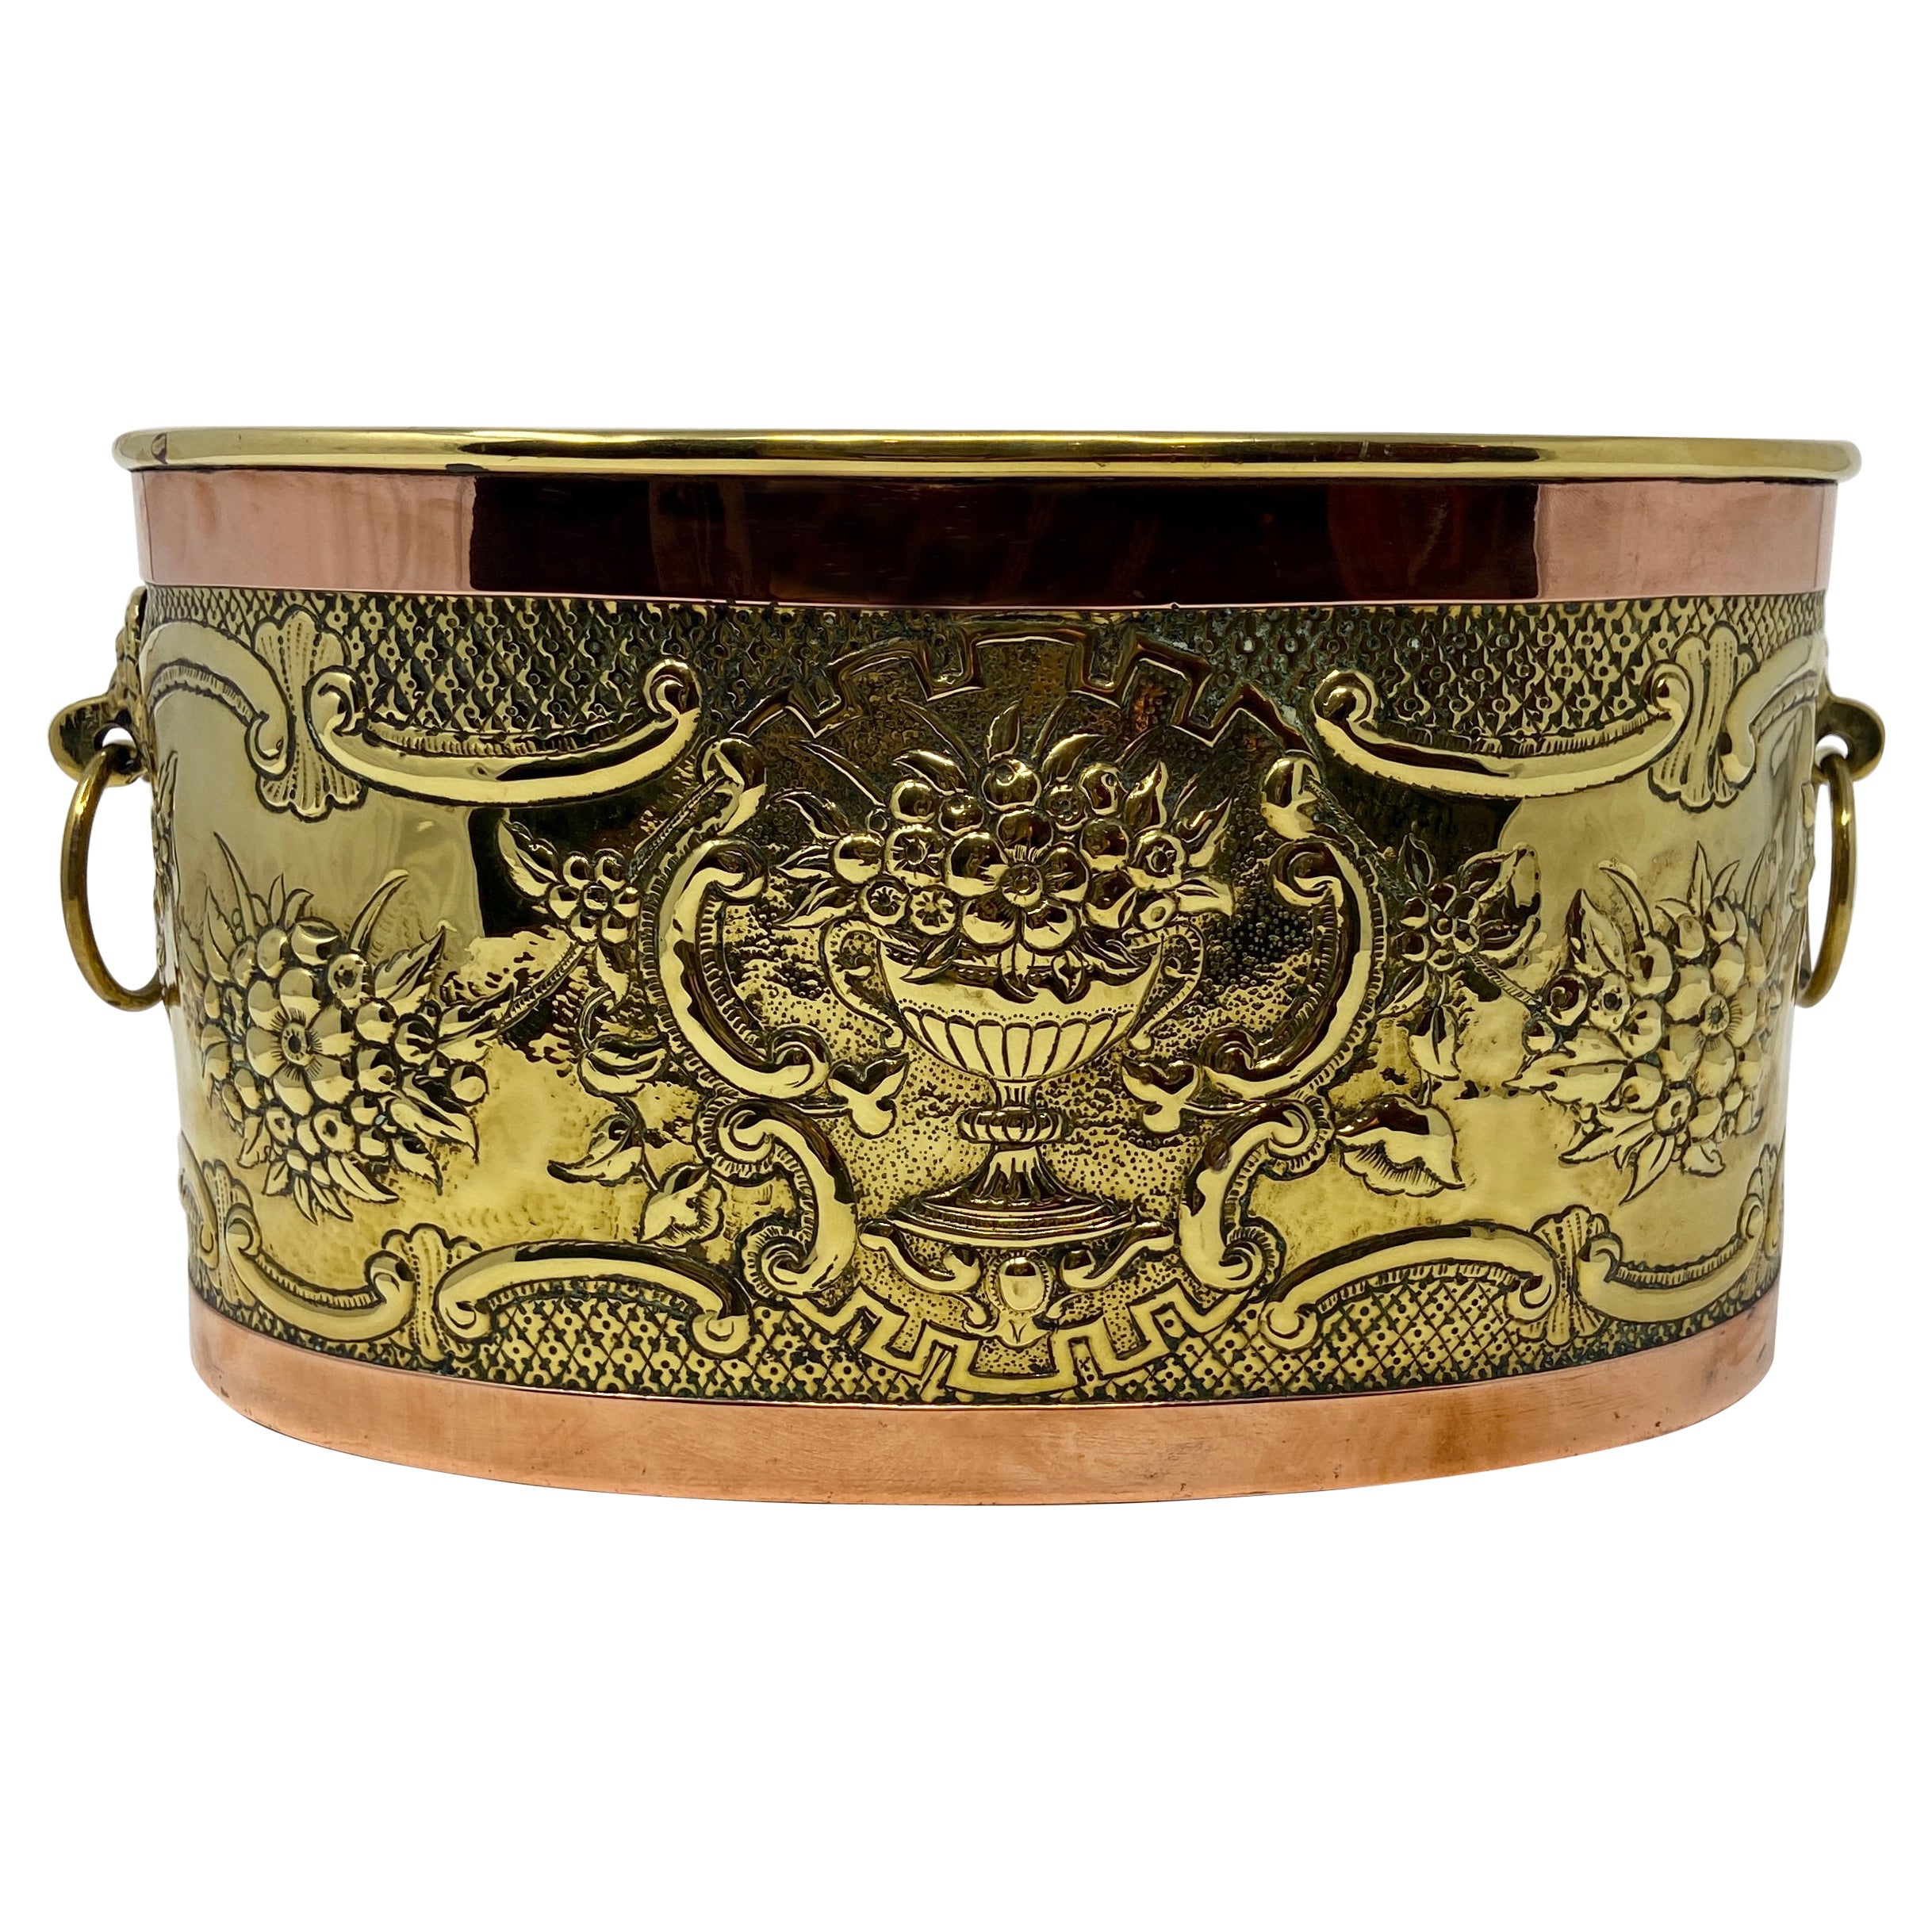 Antique Brass and Copper Oval Planter with Liner, circa 1890-1900